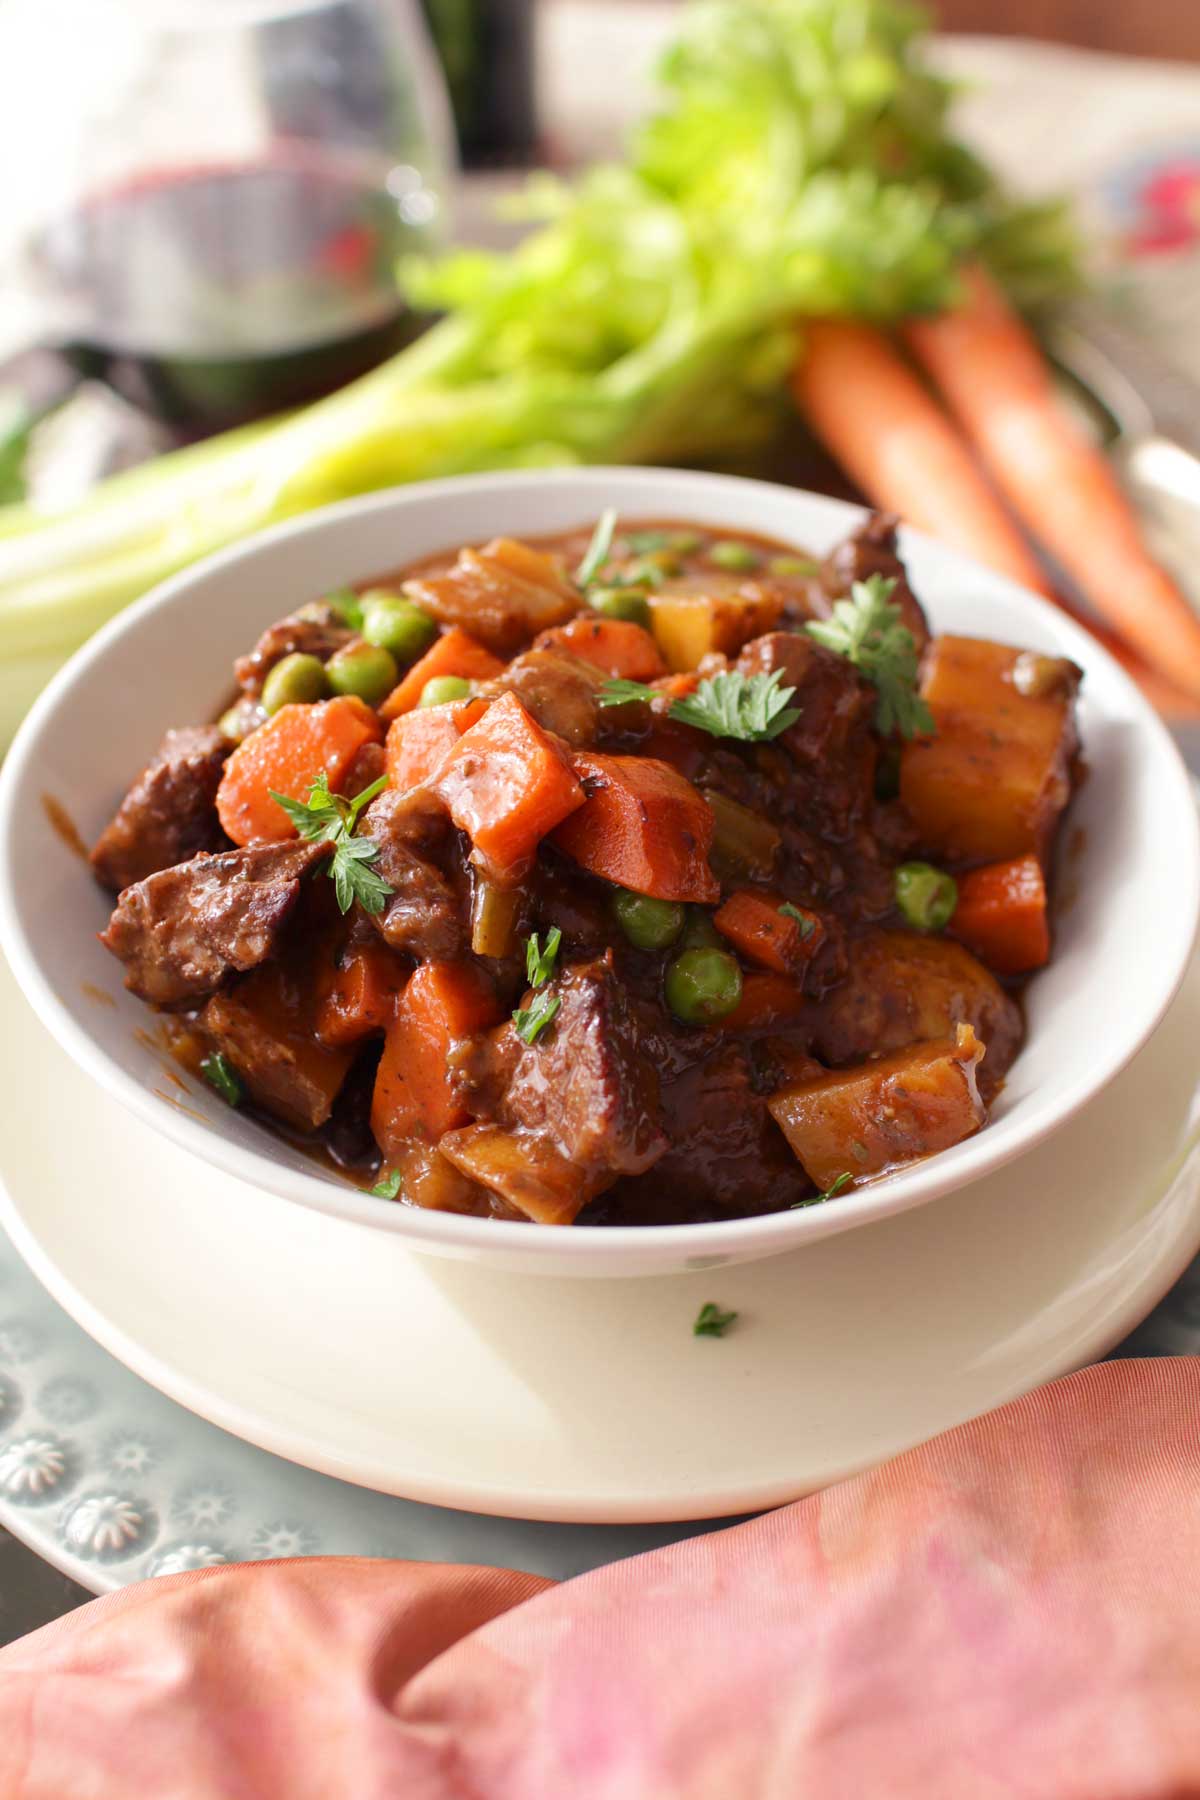 Beef stew in a bowl on a metal tray next to two carrots, a stalk of celery, and a glass of red wine.